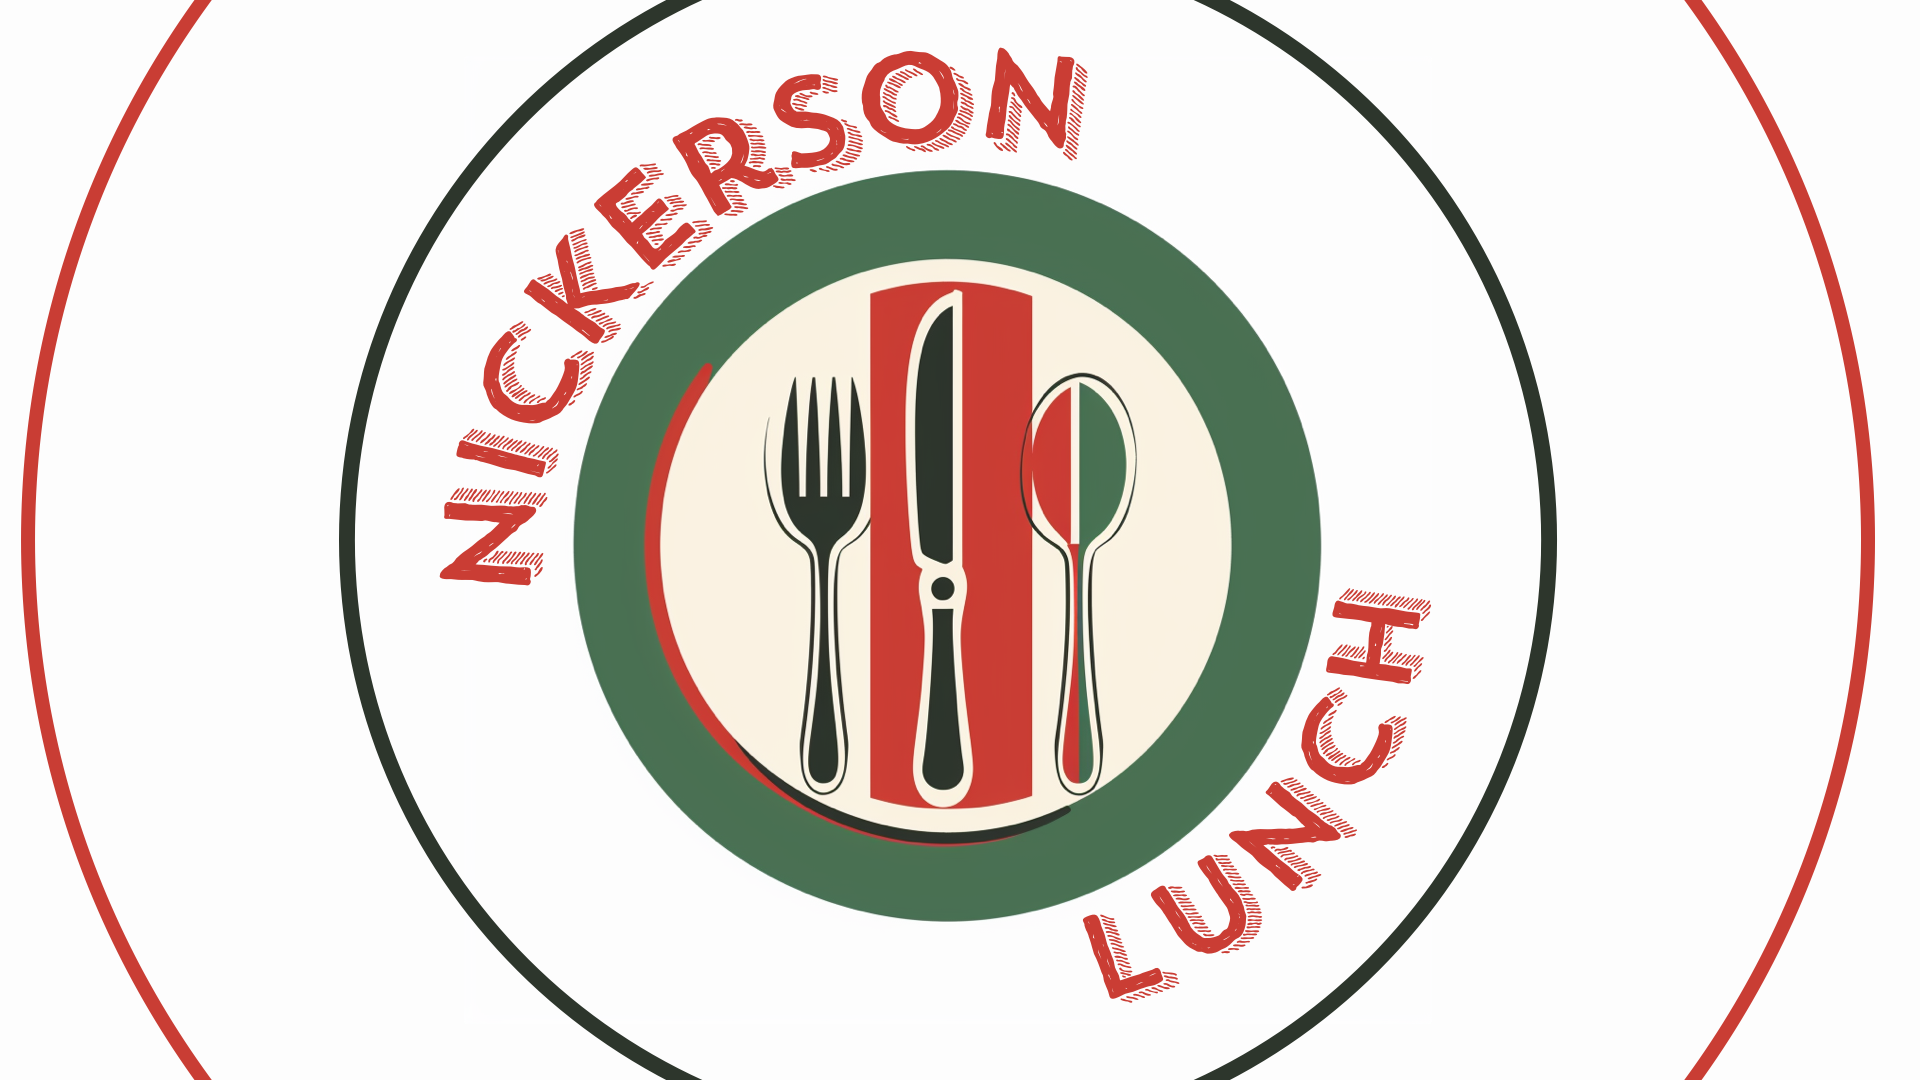 Nickerson Lunch.PNG image